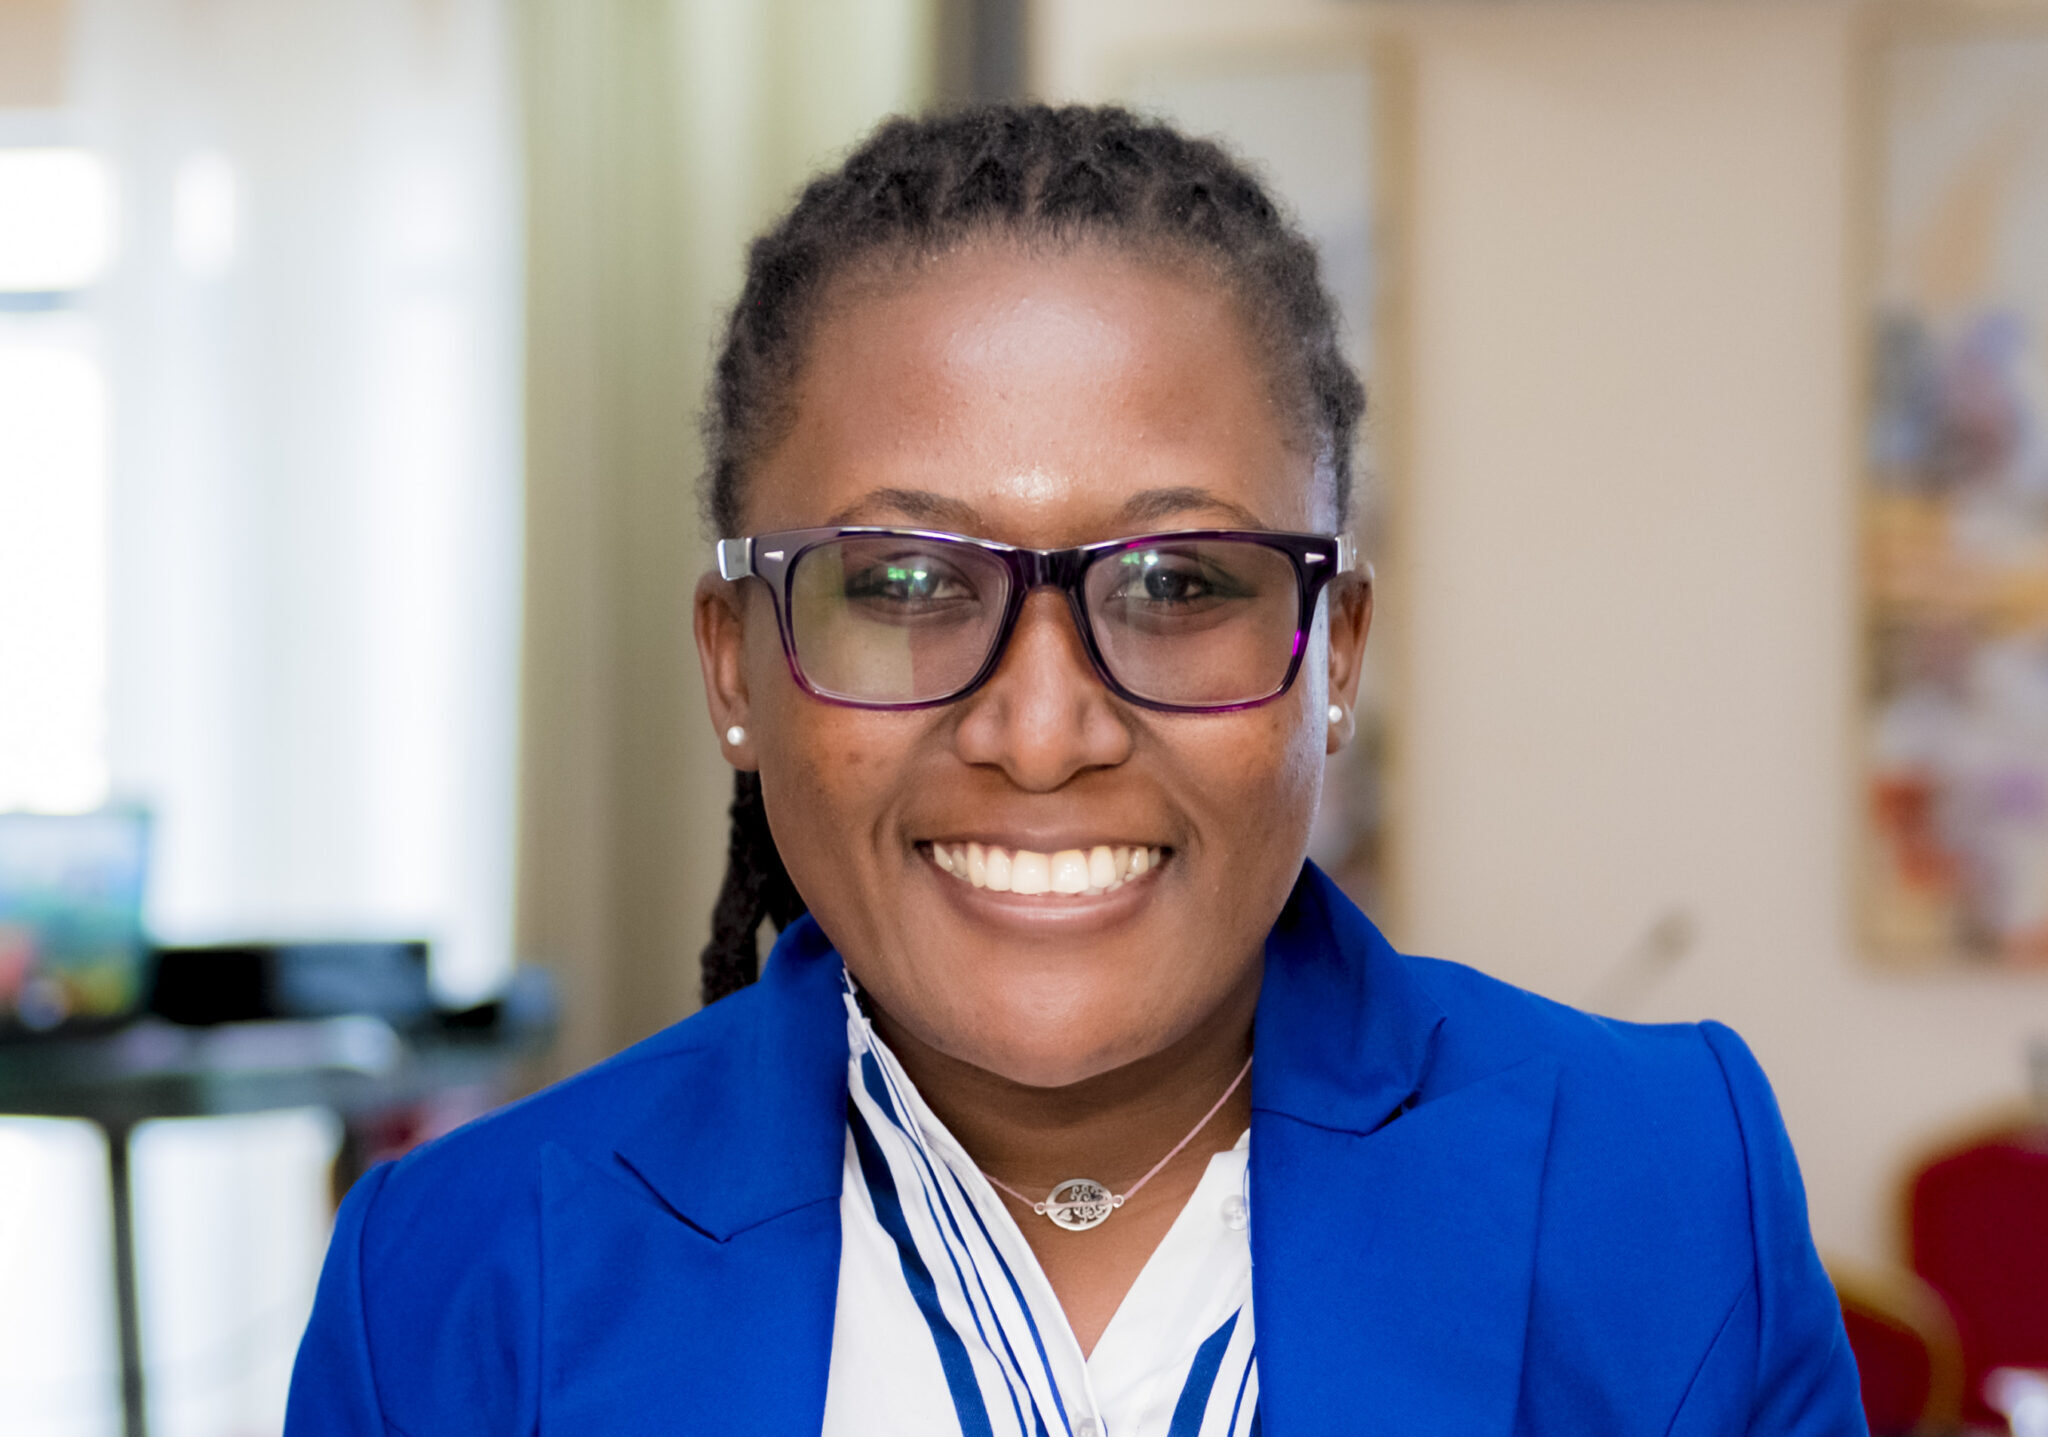 Joanita Babirye smiles for the camera while wearing glasses and a blue jacket.